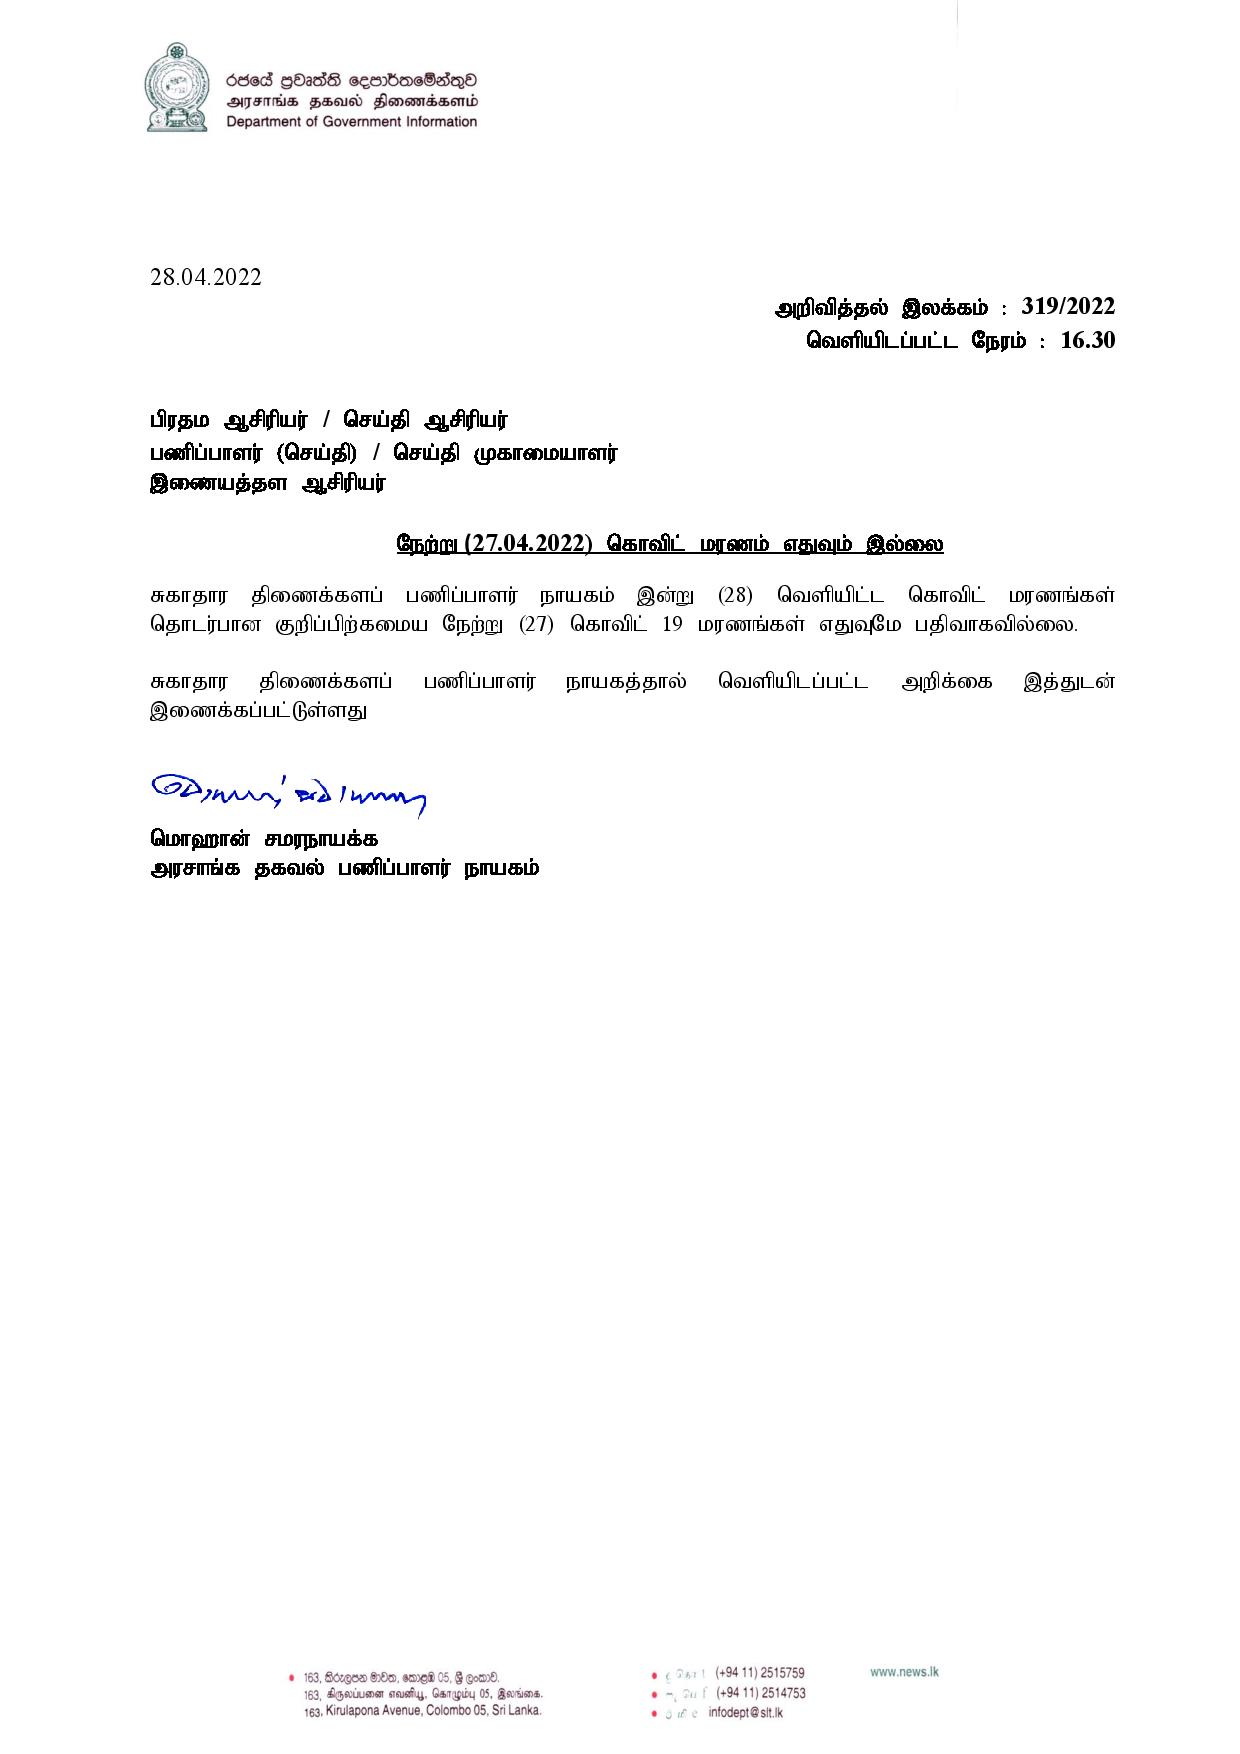 Release No 319 Tamil page 001